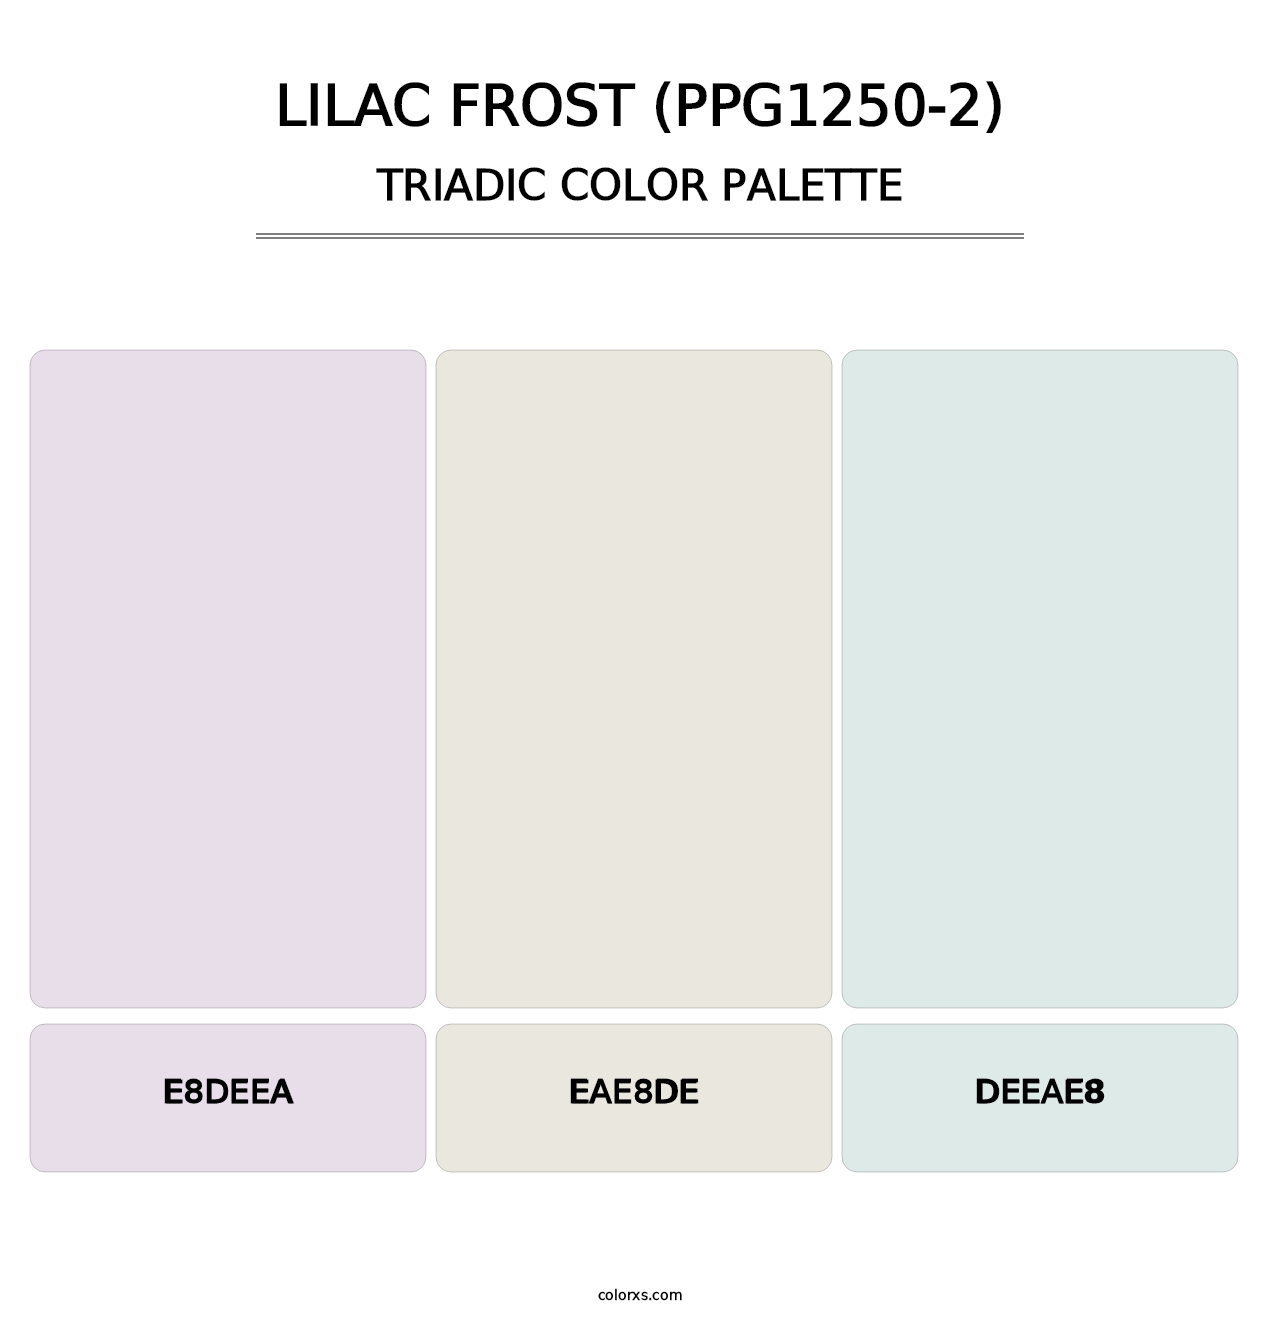 Lilac Frost (PPG1250-2) - Triadic Color Palette